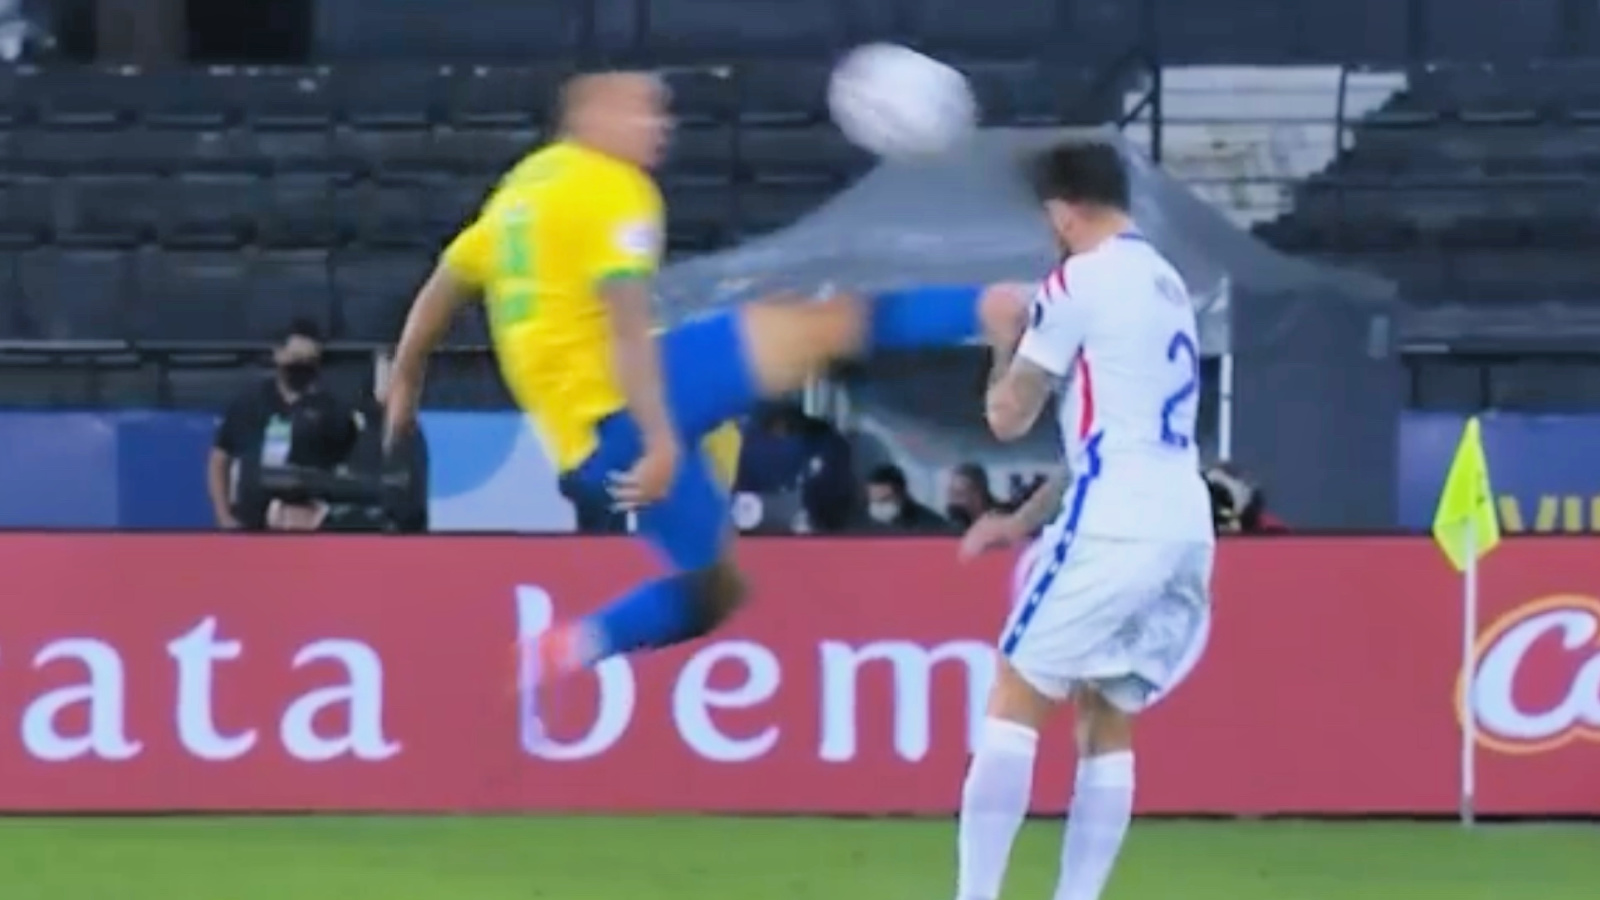 Watch: Gabriel Jesus sees red for gruesome kick on opponent’s face